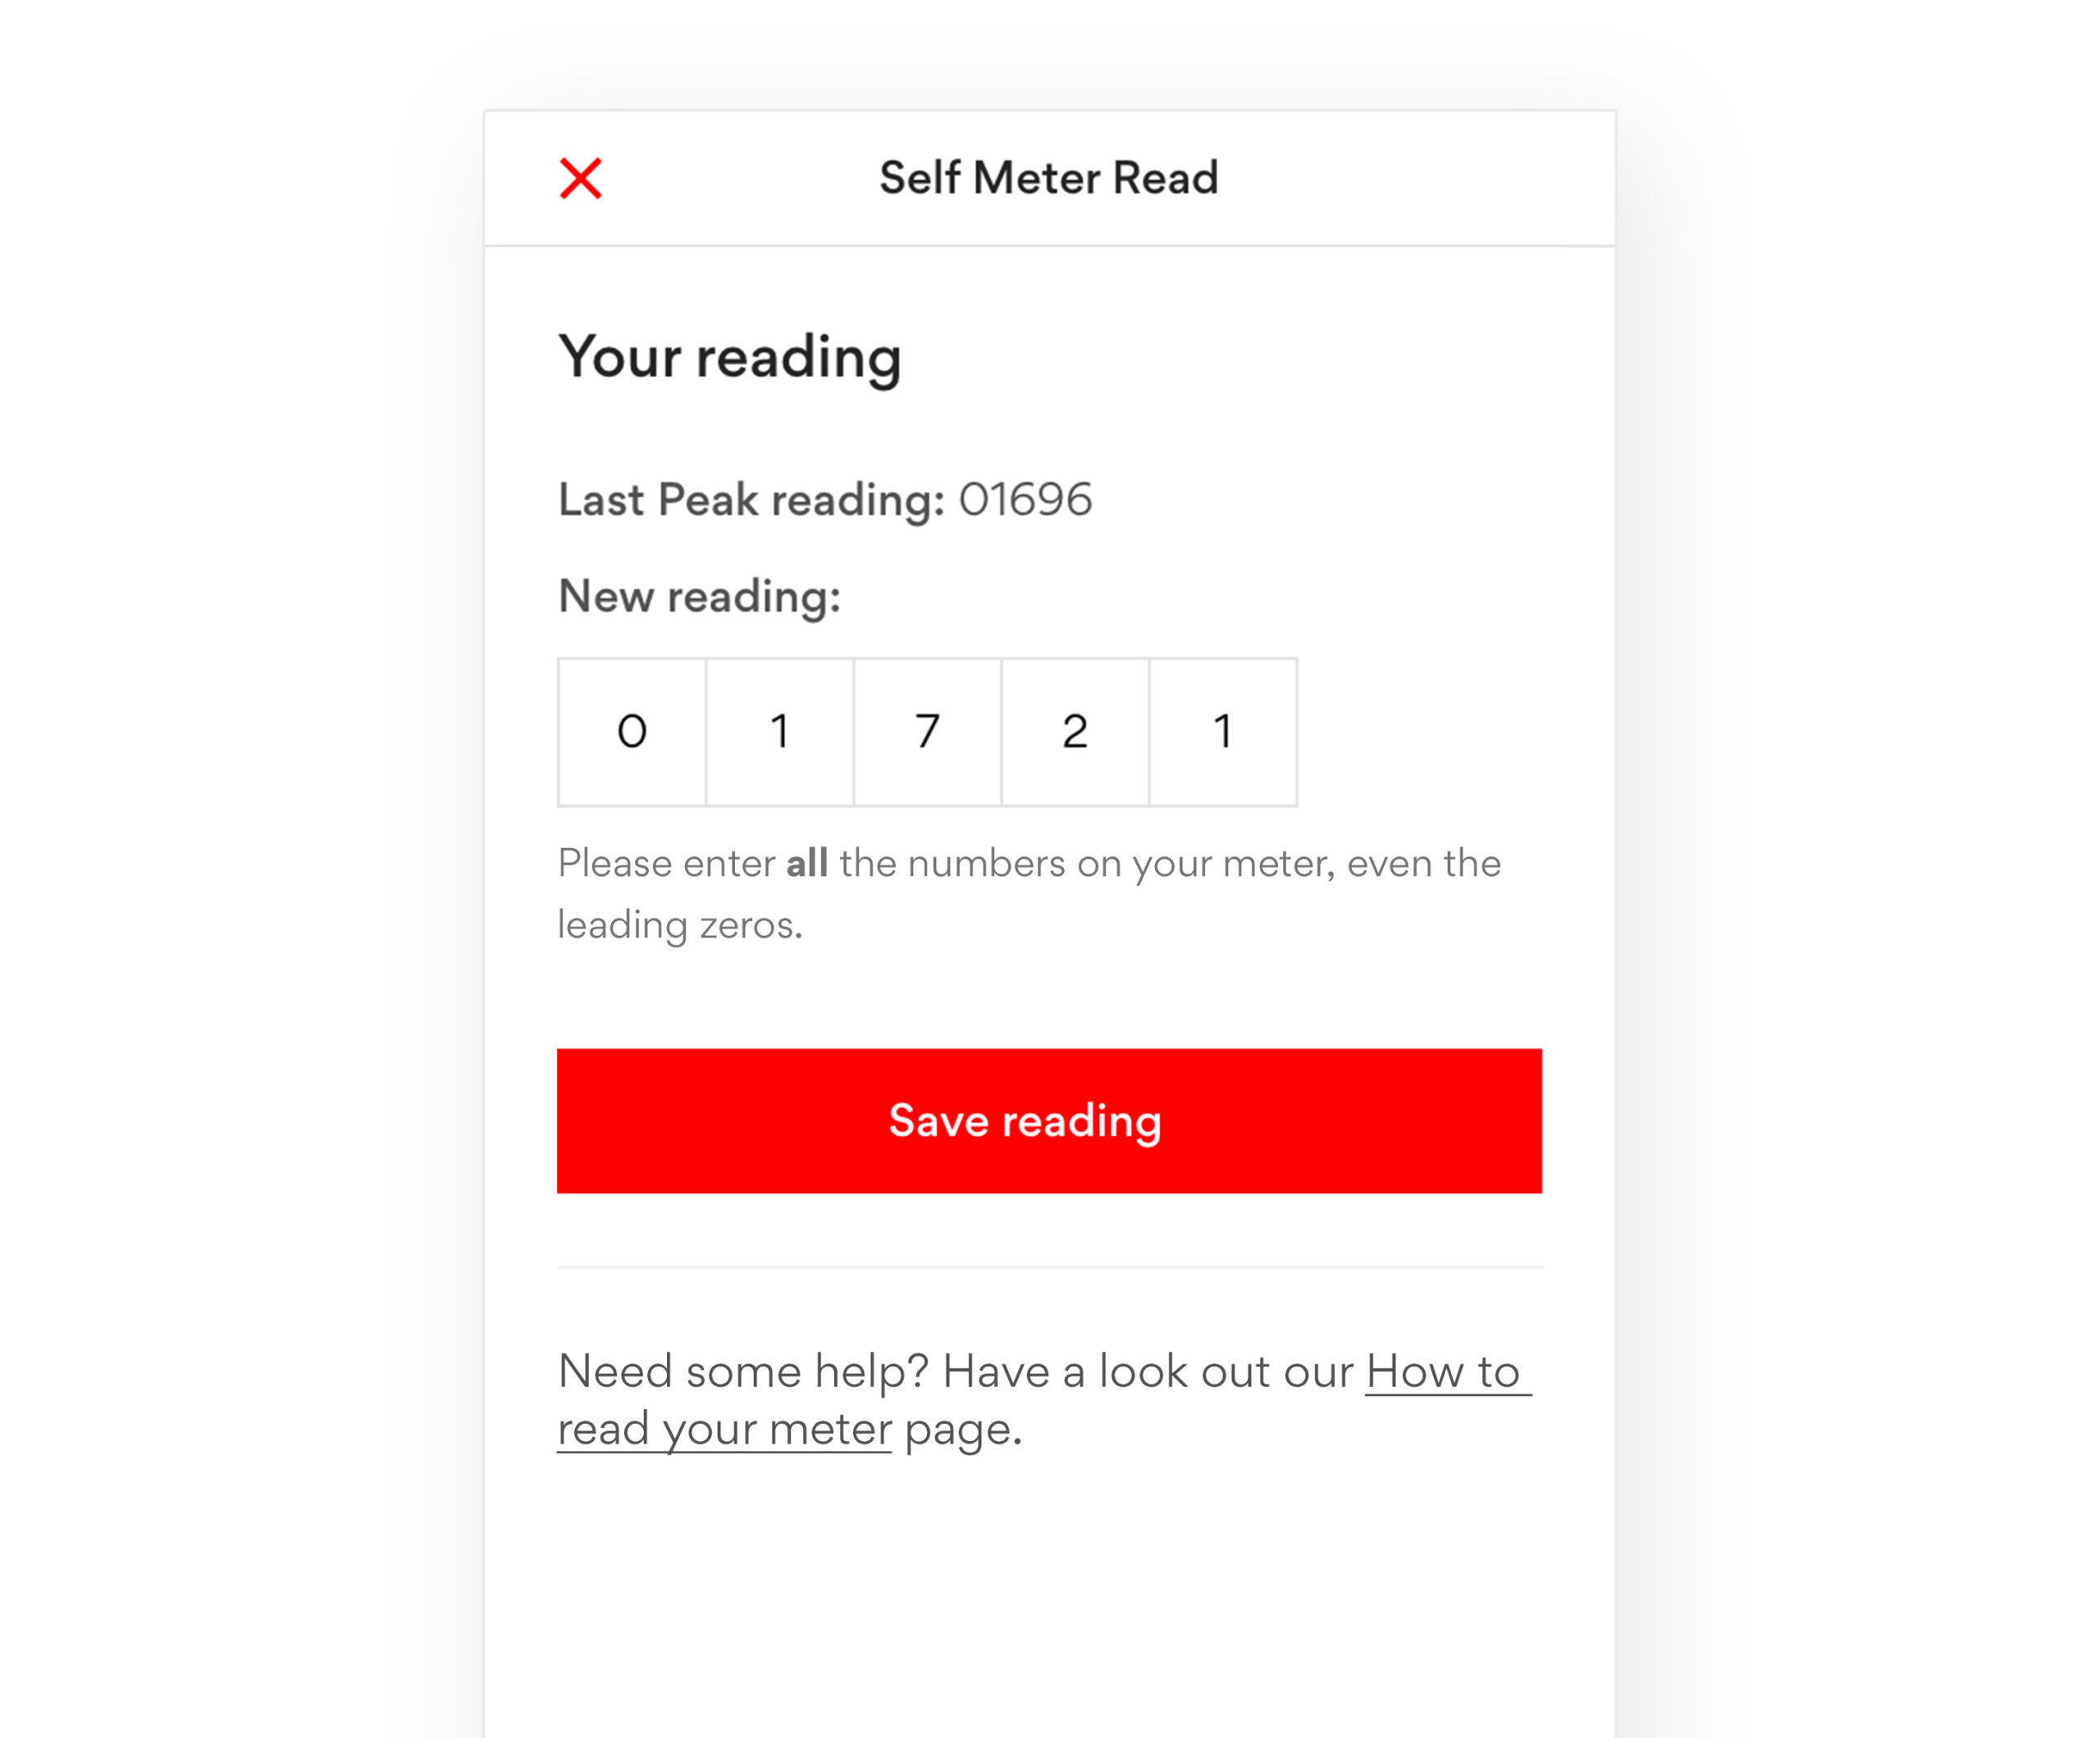 Self meter reading screen from the Origin app which let's a customer add their current reading to potentially get a reduced bill